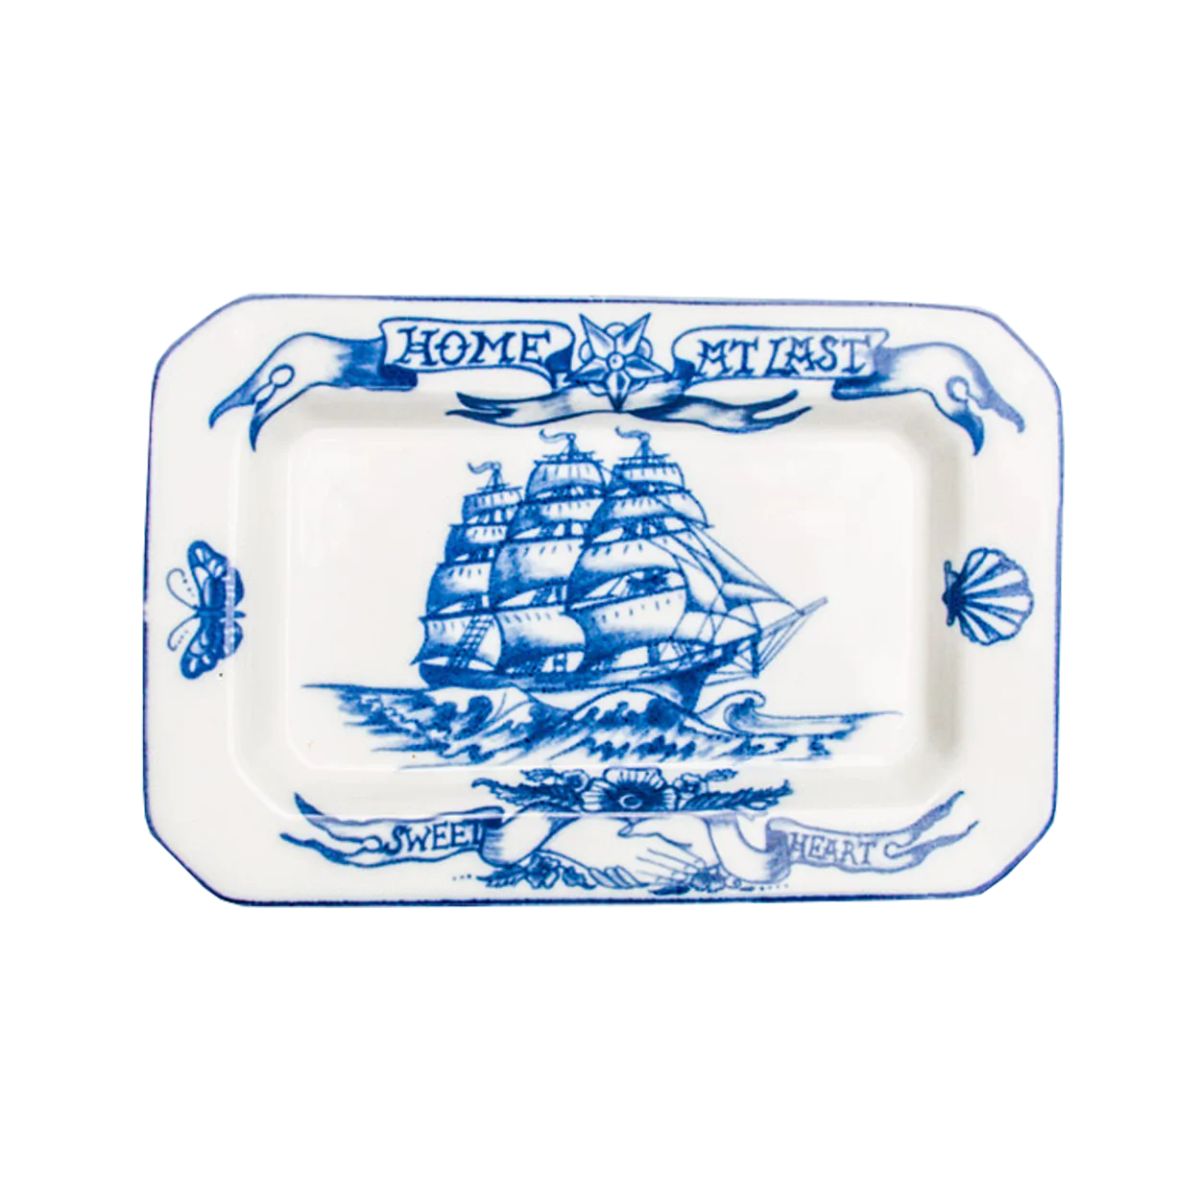 &#39;Home at Last&#39; Blue and White Platter